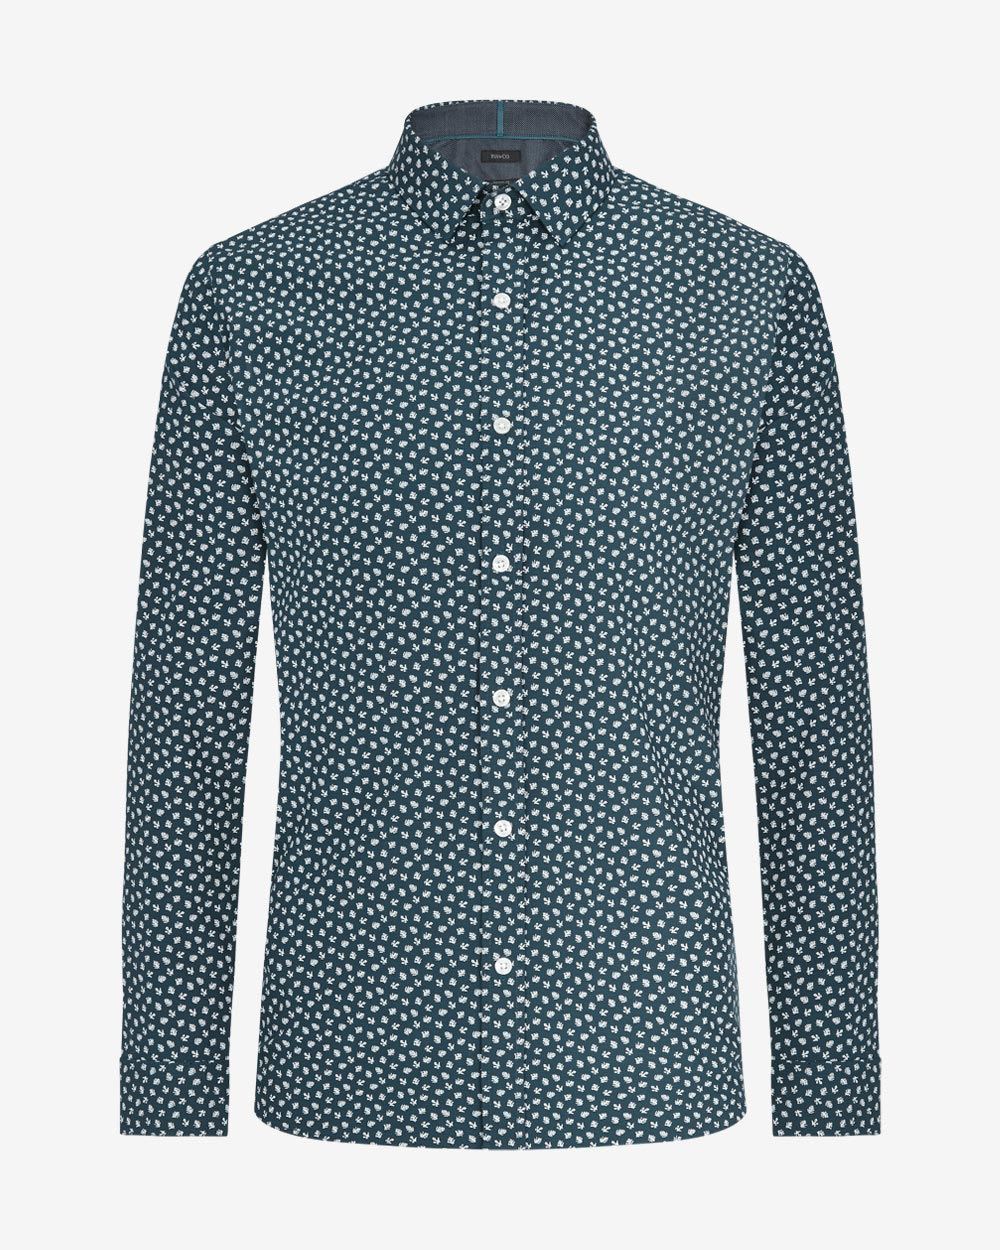 Tailored fit shirt with leaf print | RW&CO.